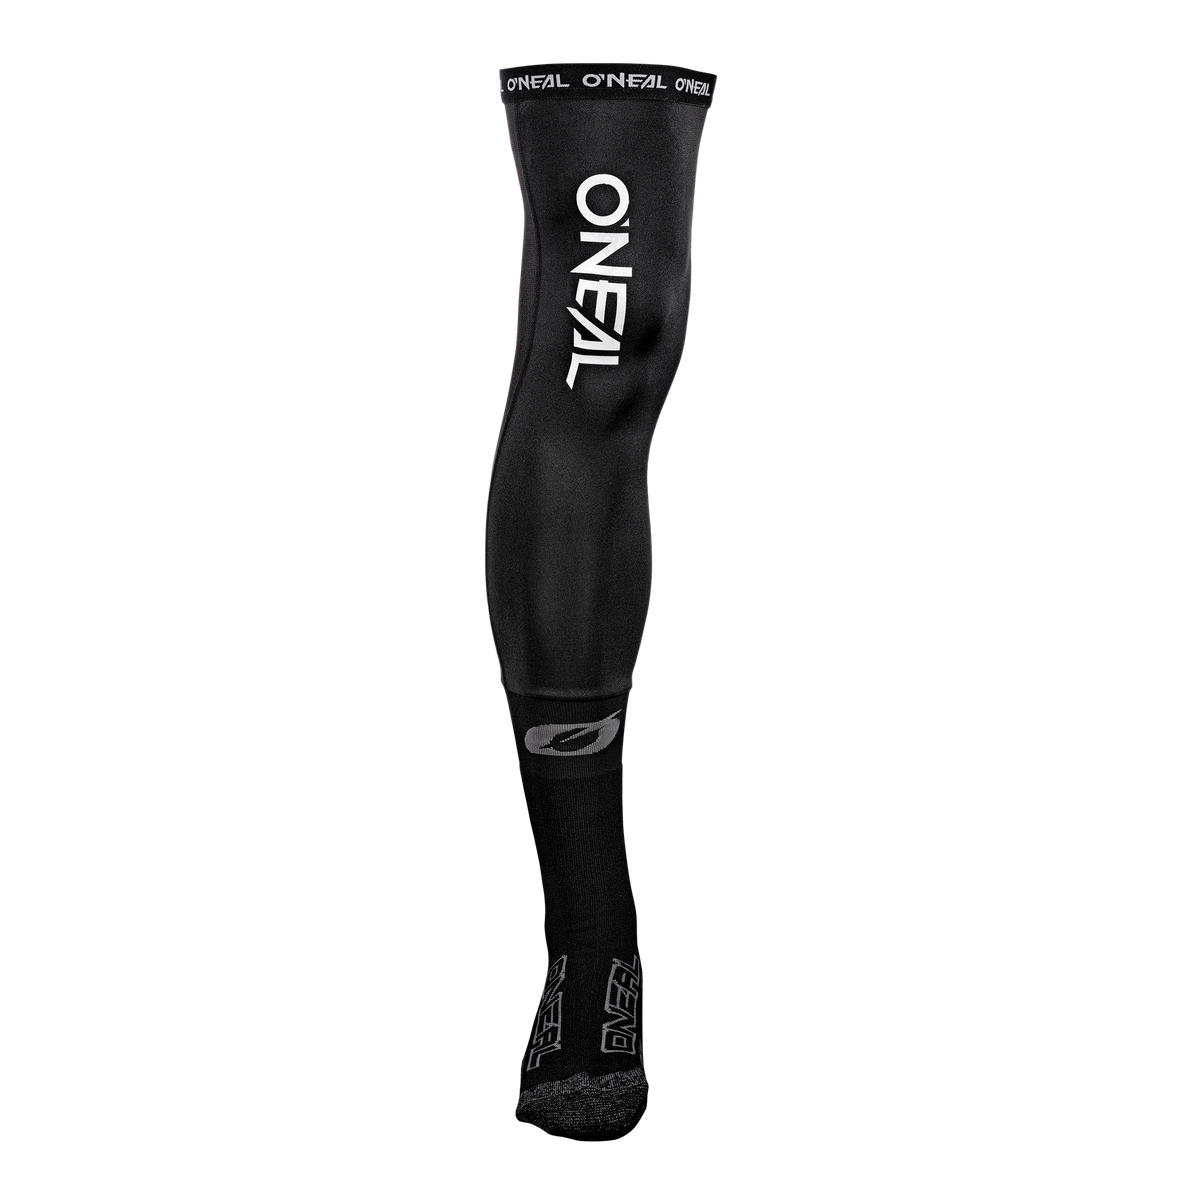 https://cdn.oneal.eu/assets/importedProductImages/ACCESSORIES/PRO%20XL/black/2018_ONeal_PRO%20XL_Kneebrace%20Sock_black_front.png